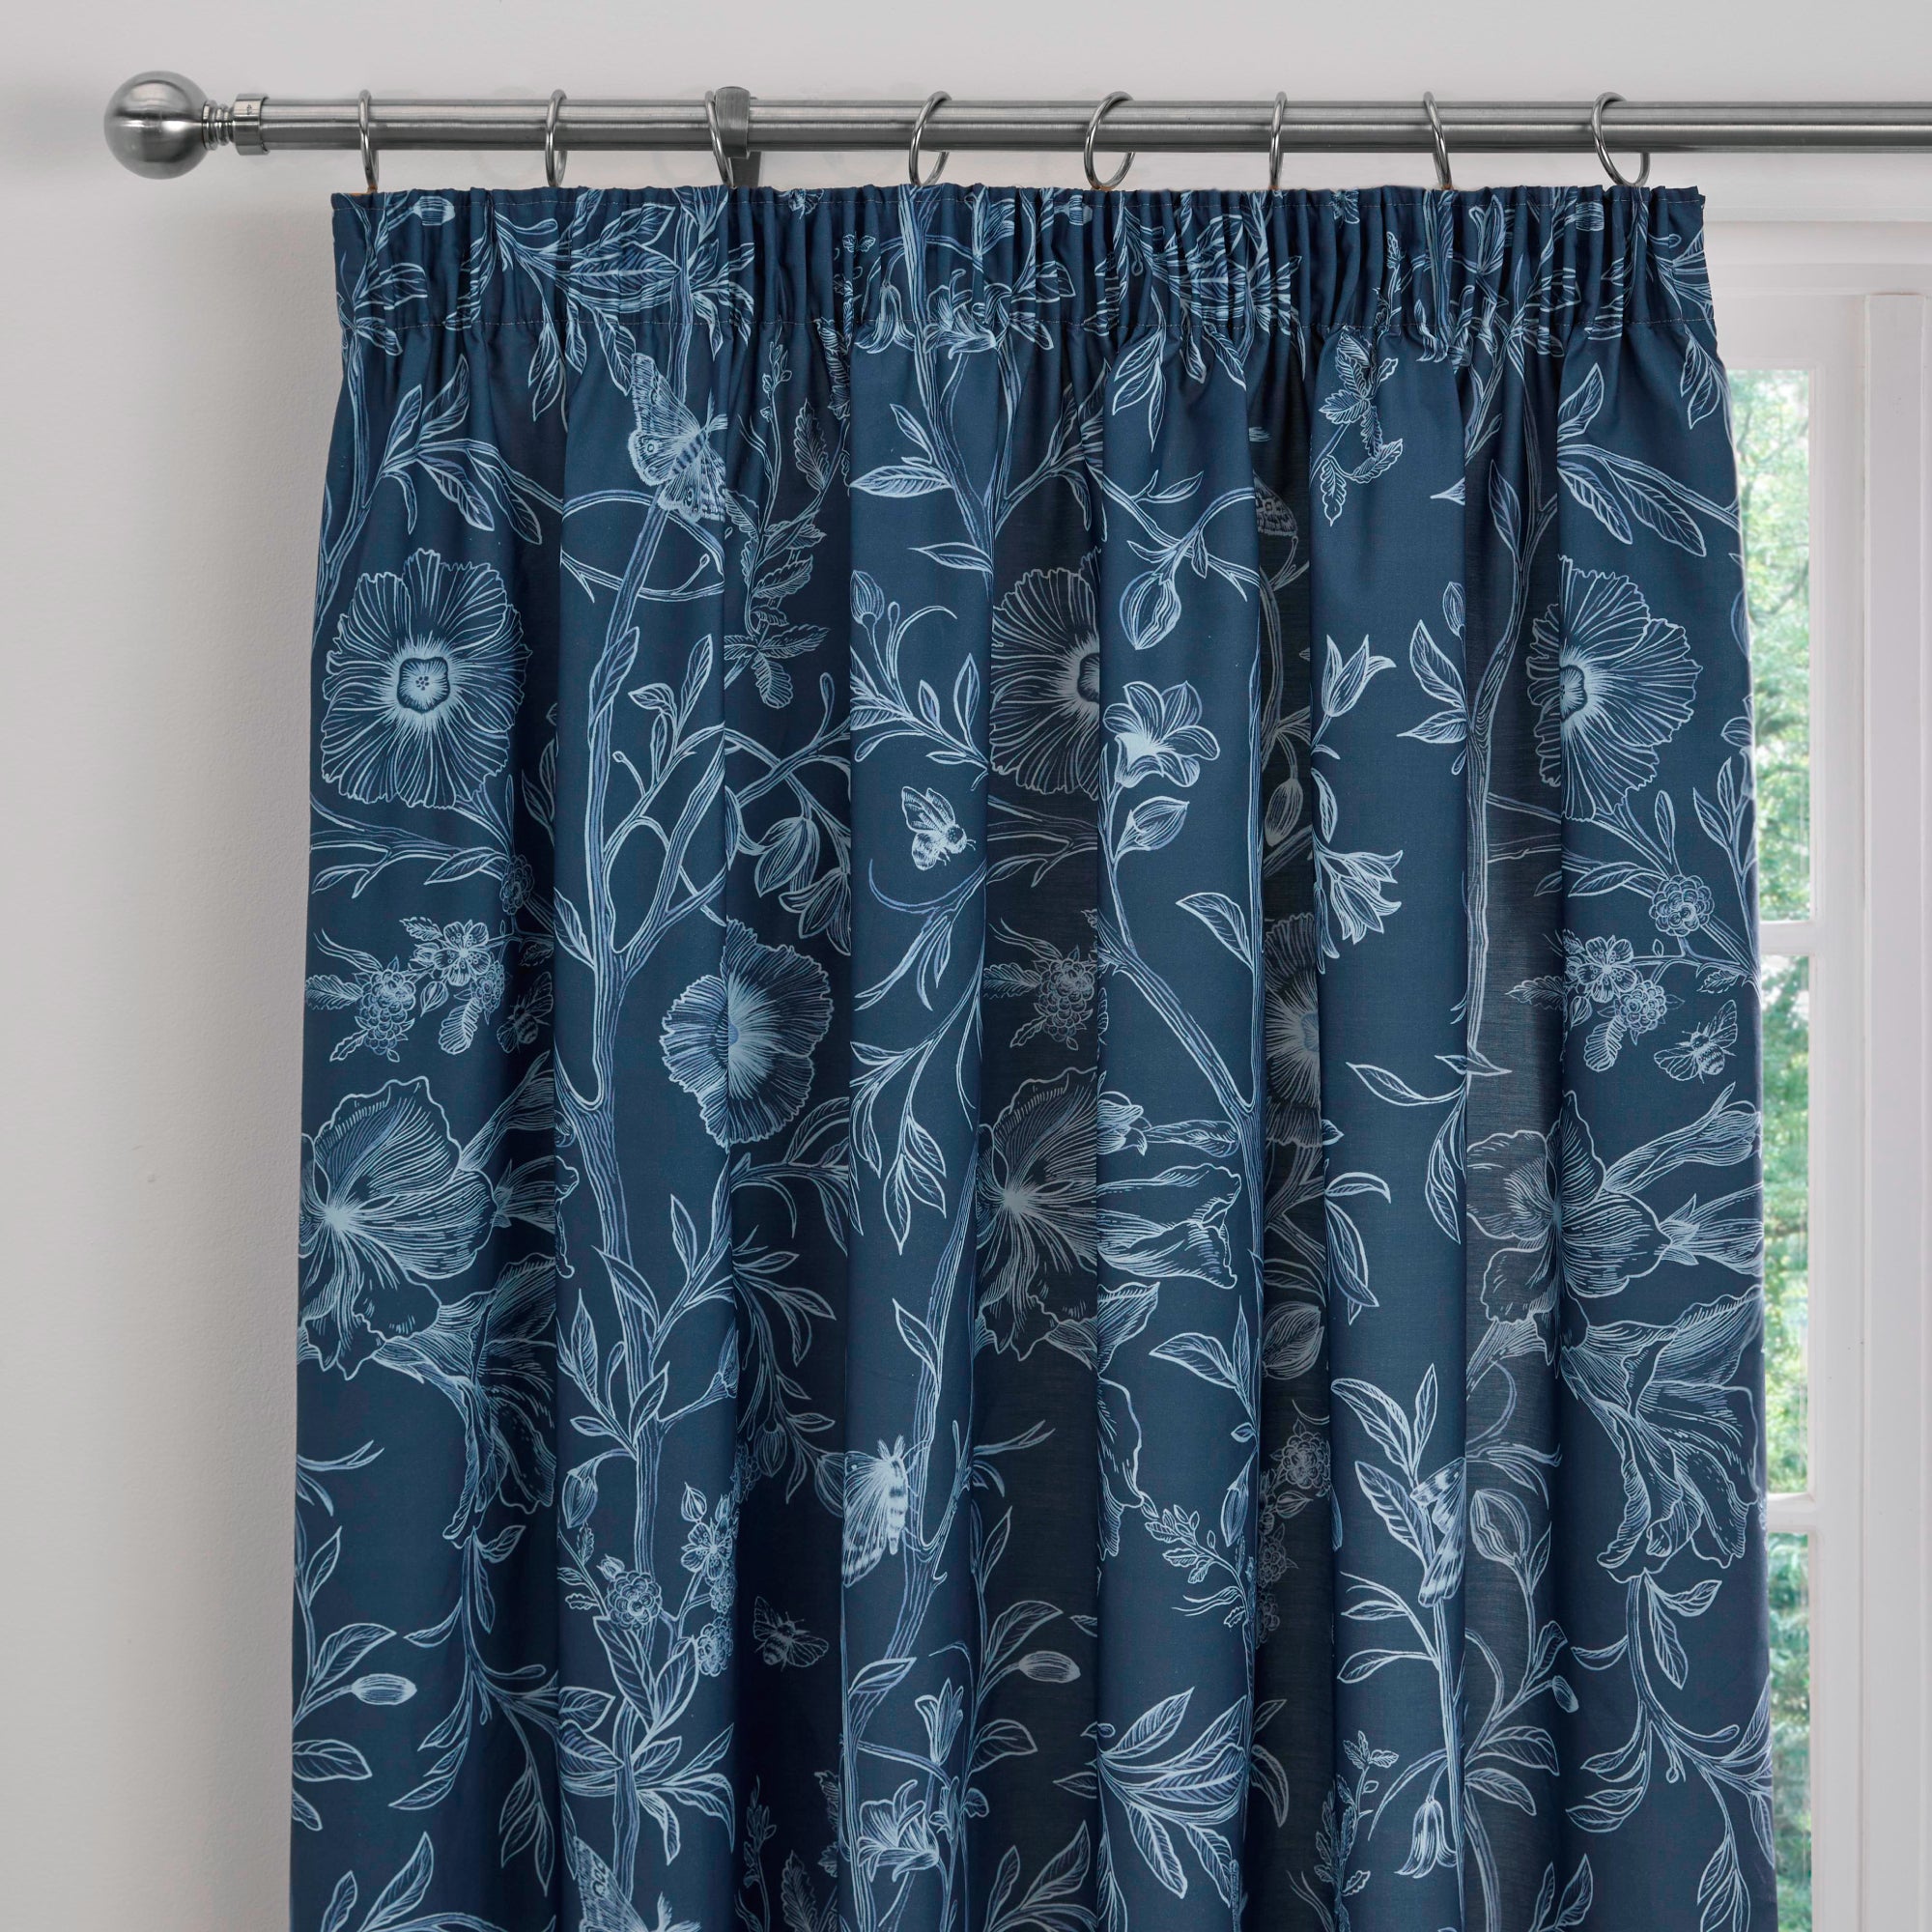 Pair of Pencil Pleat Curtains With Tie-Backs Lorie by Dreams And Drapes Design in Blue